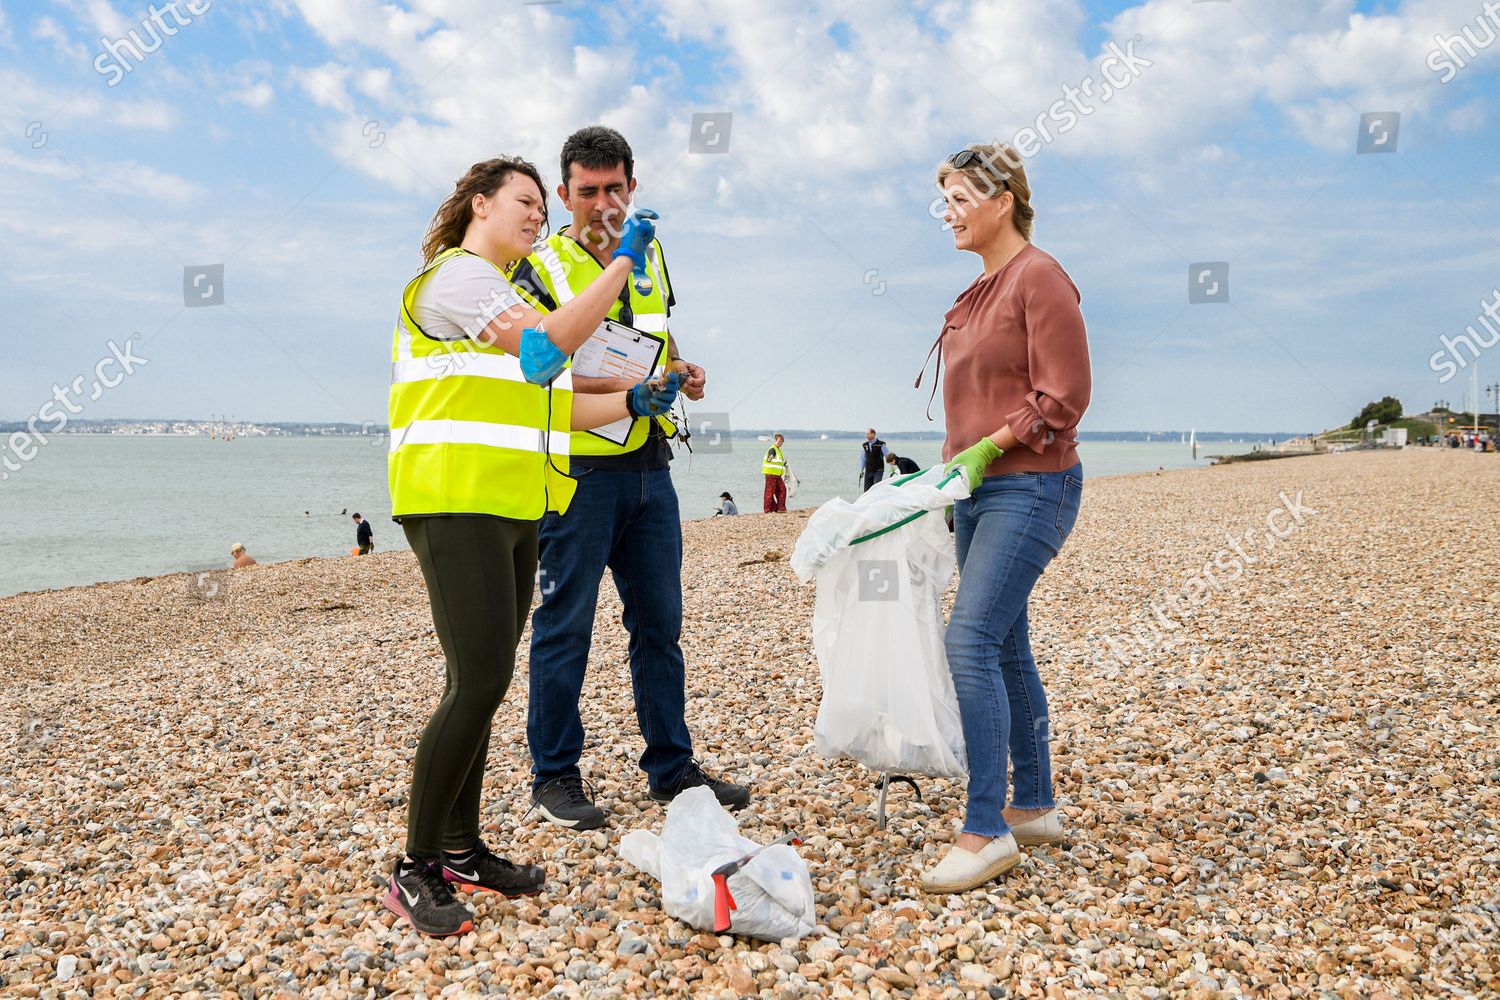 prince-edward-and-sophie-countess-of-wessex-great-british-beach-clean-southsea-beach-portsmouth-uk-shutterstock-editorial-10782998am.jpg